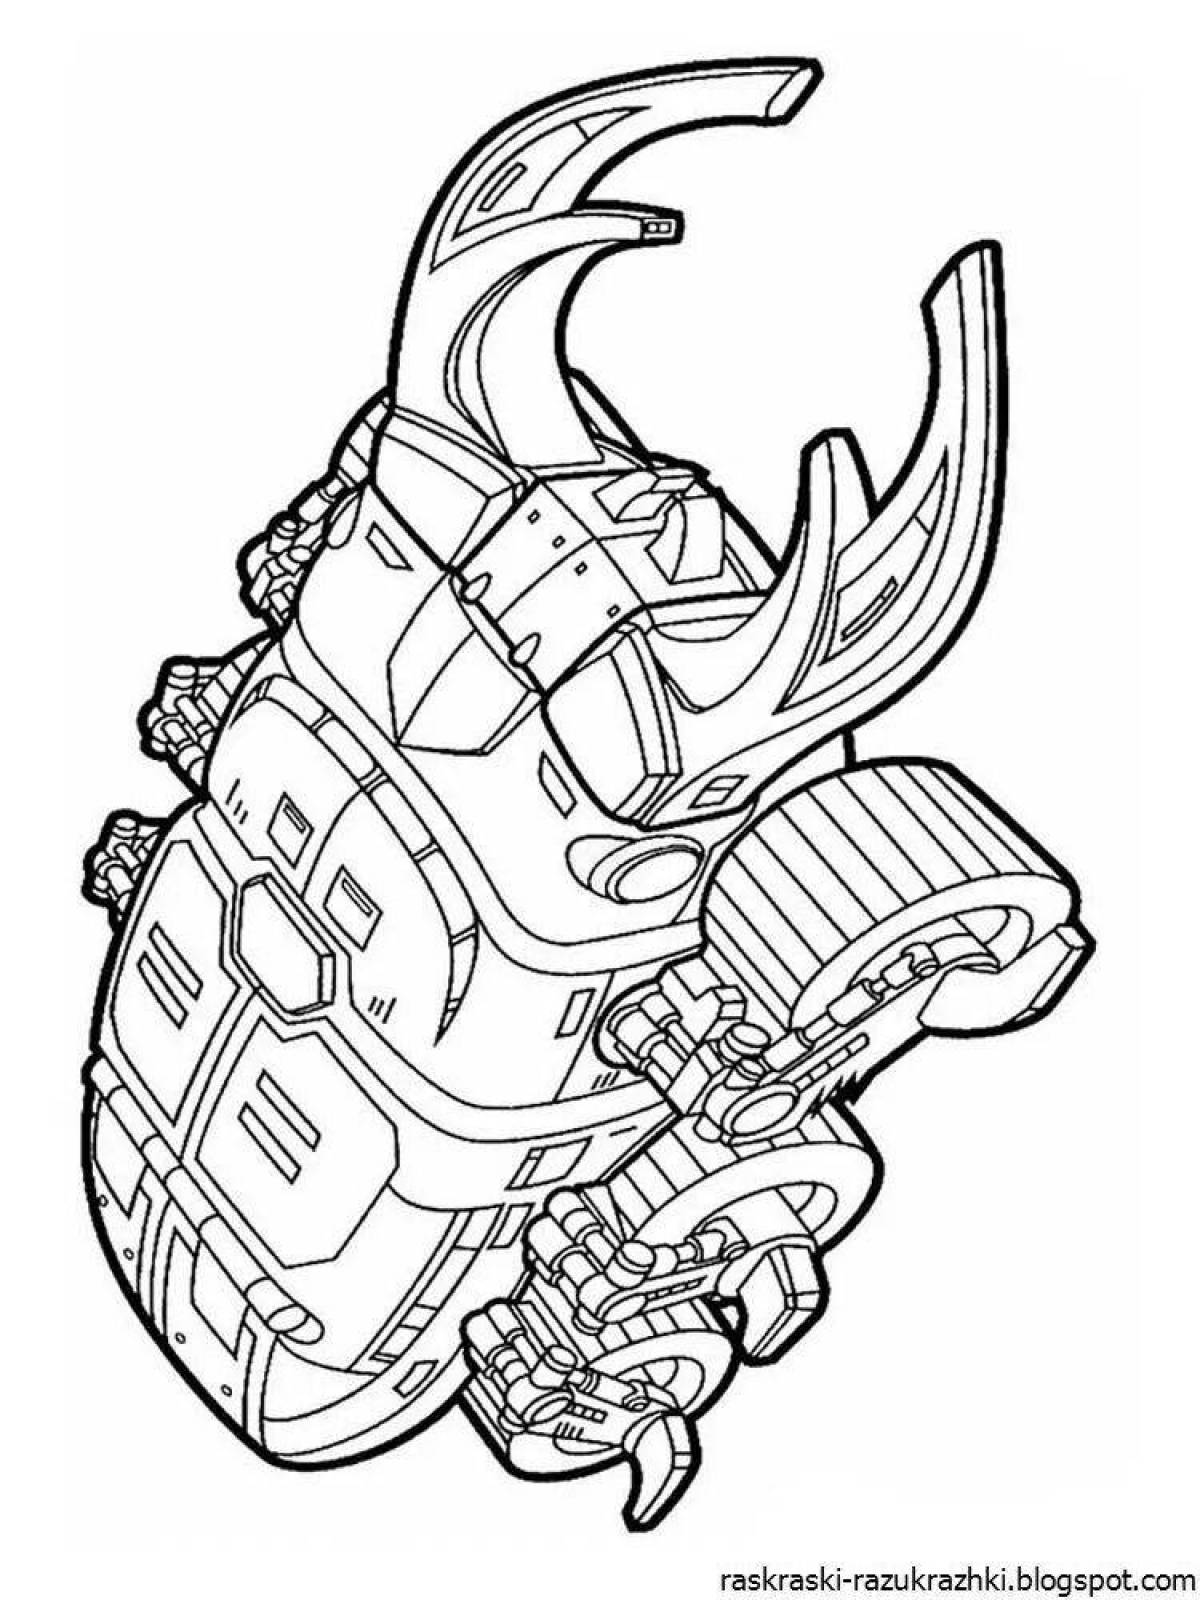 Exotic screamers coloring pages for kids